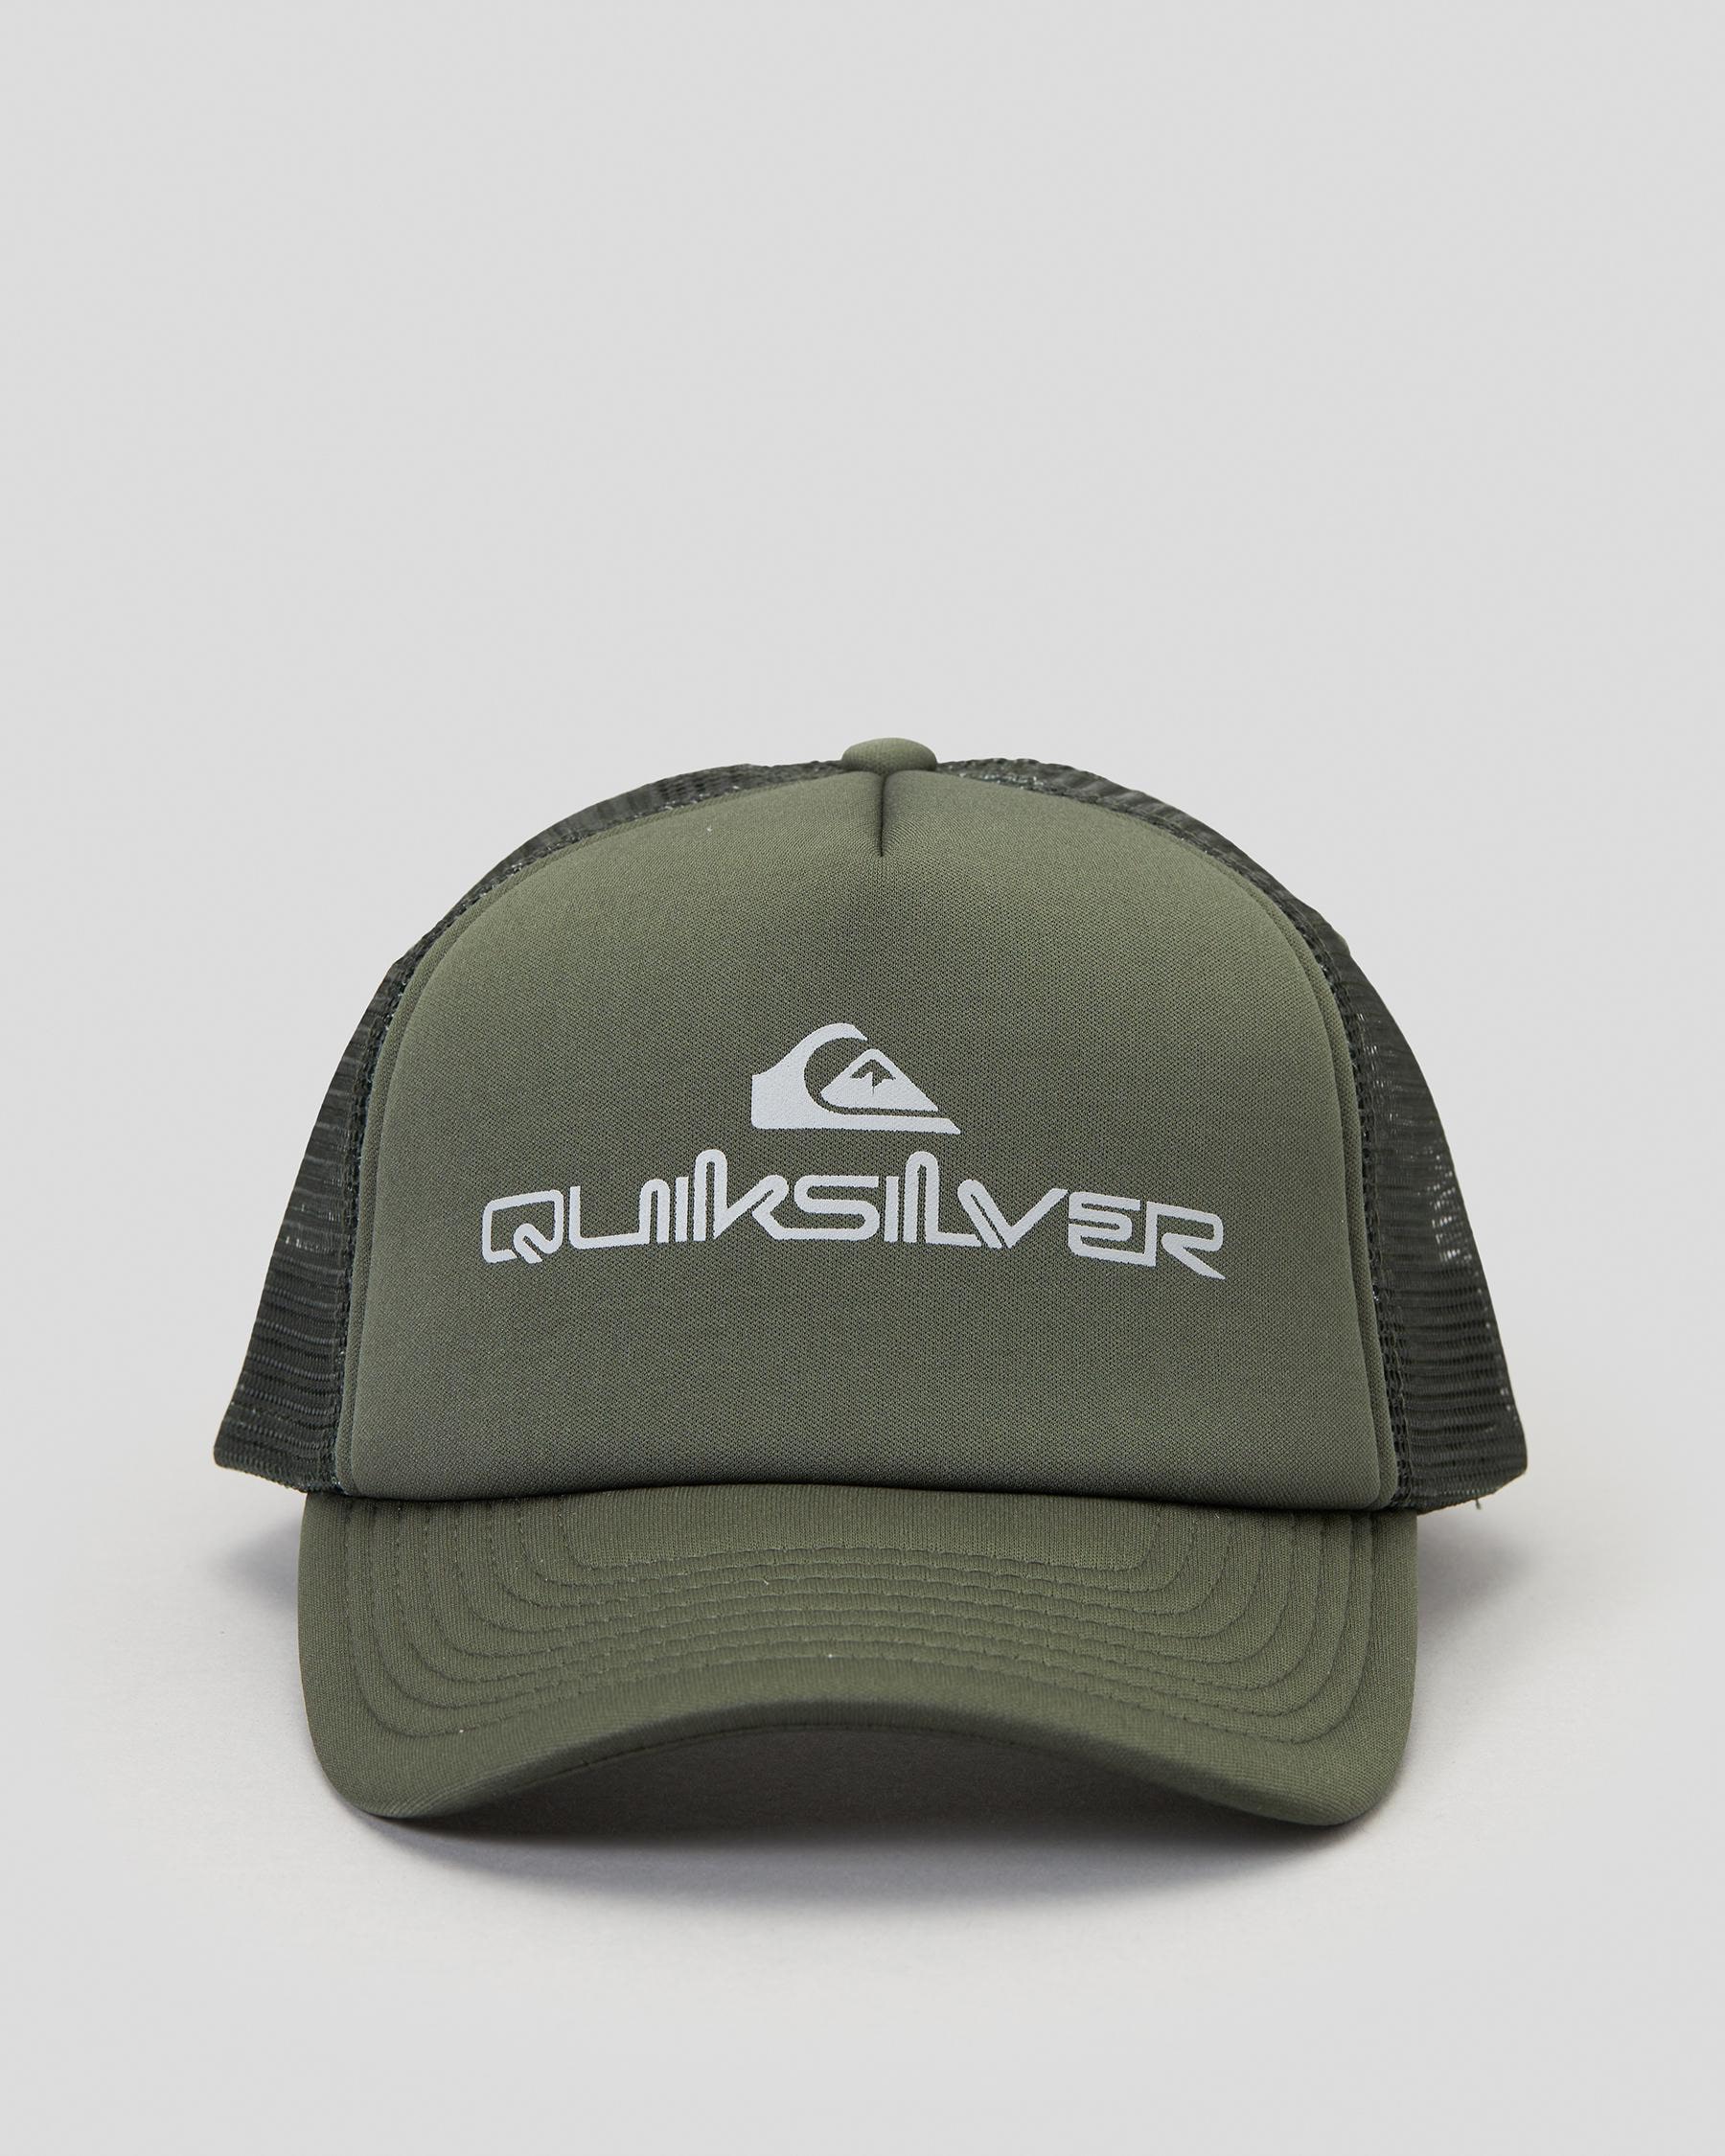 Quiksilver Omnistack & Thyme States Trucker Shipping Beach In - United Easy Cap Returns FREE* City 